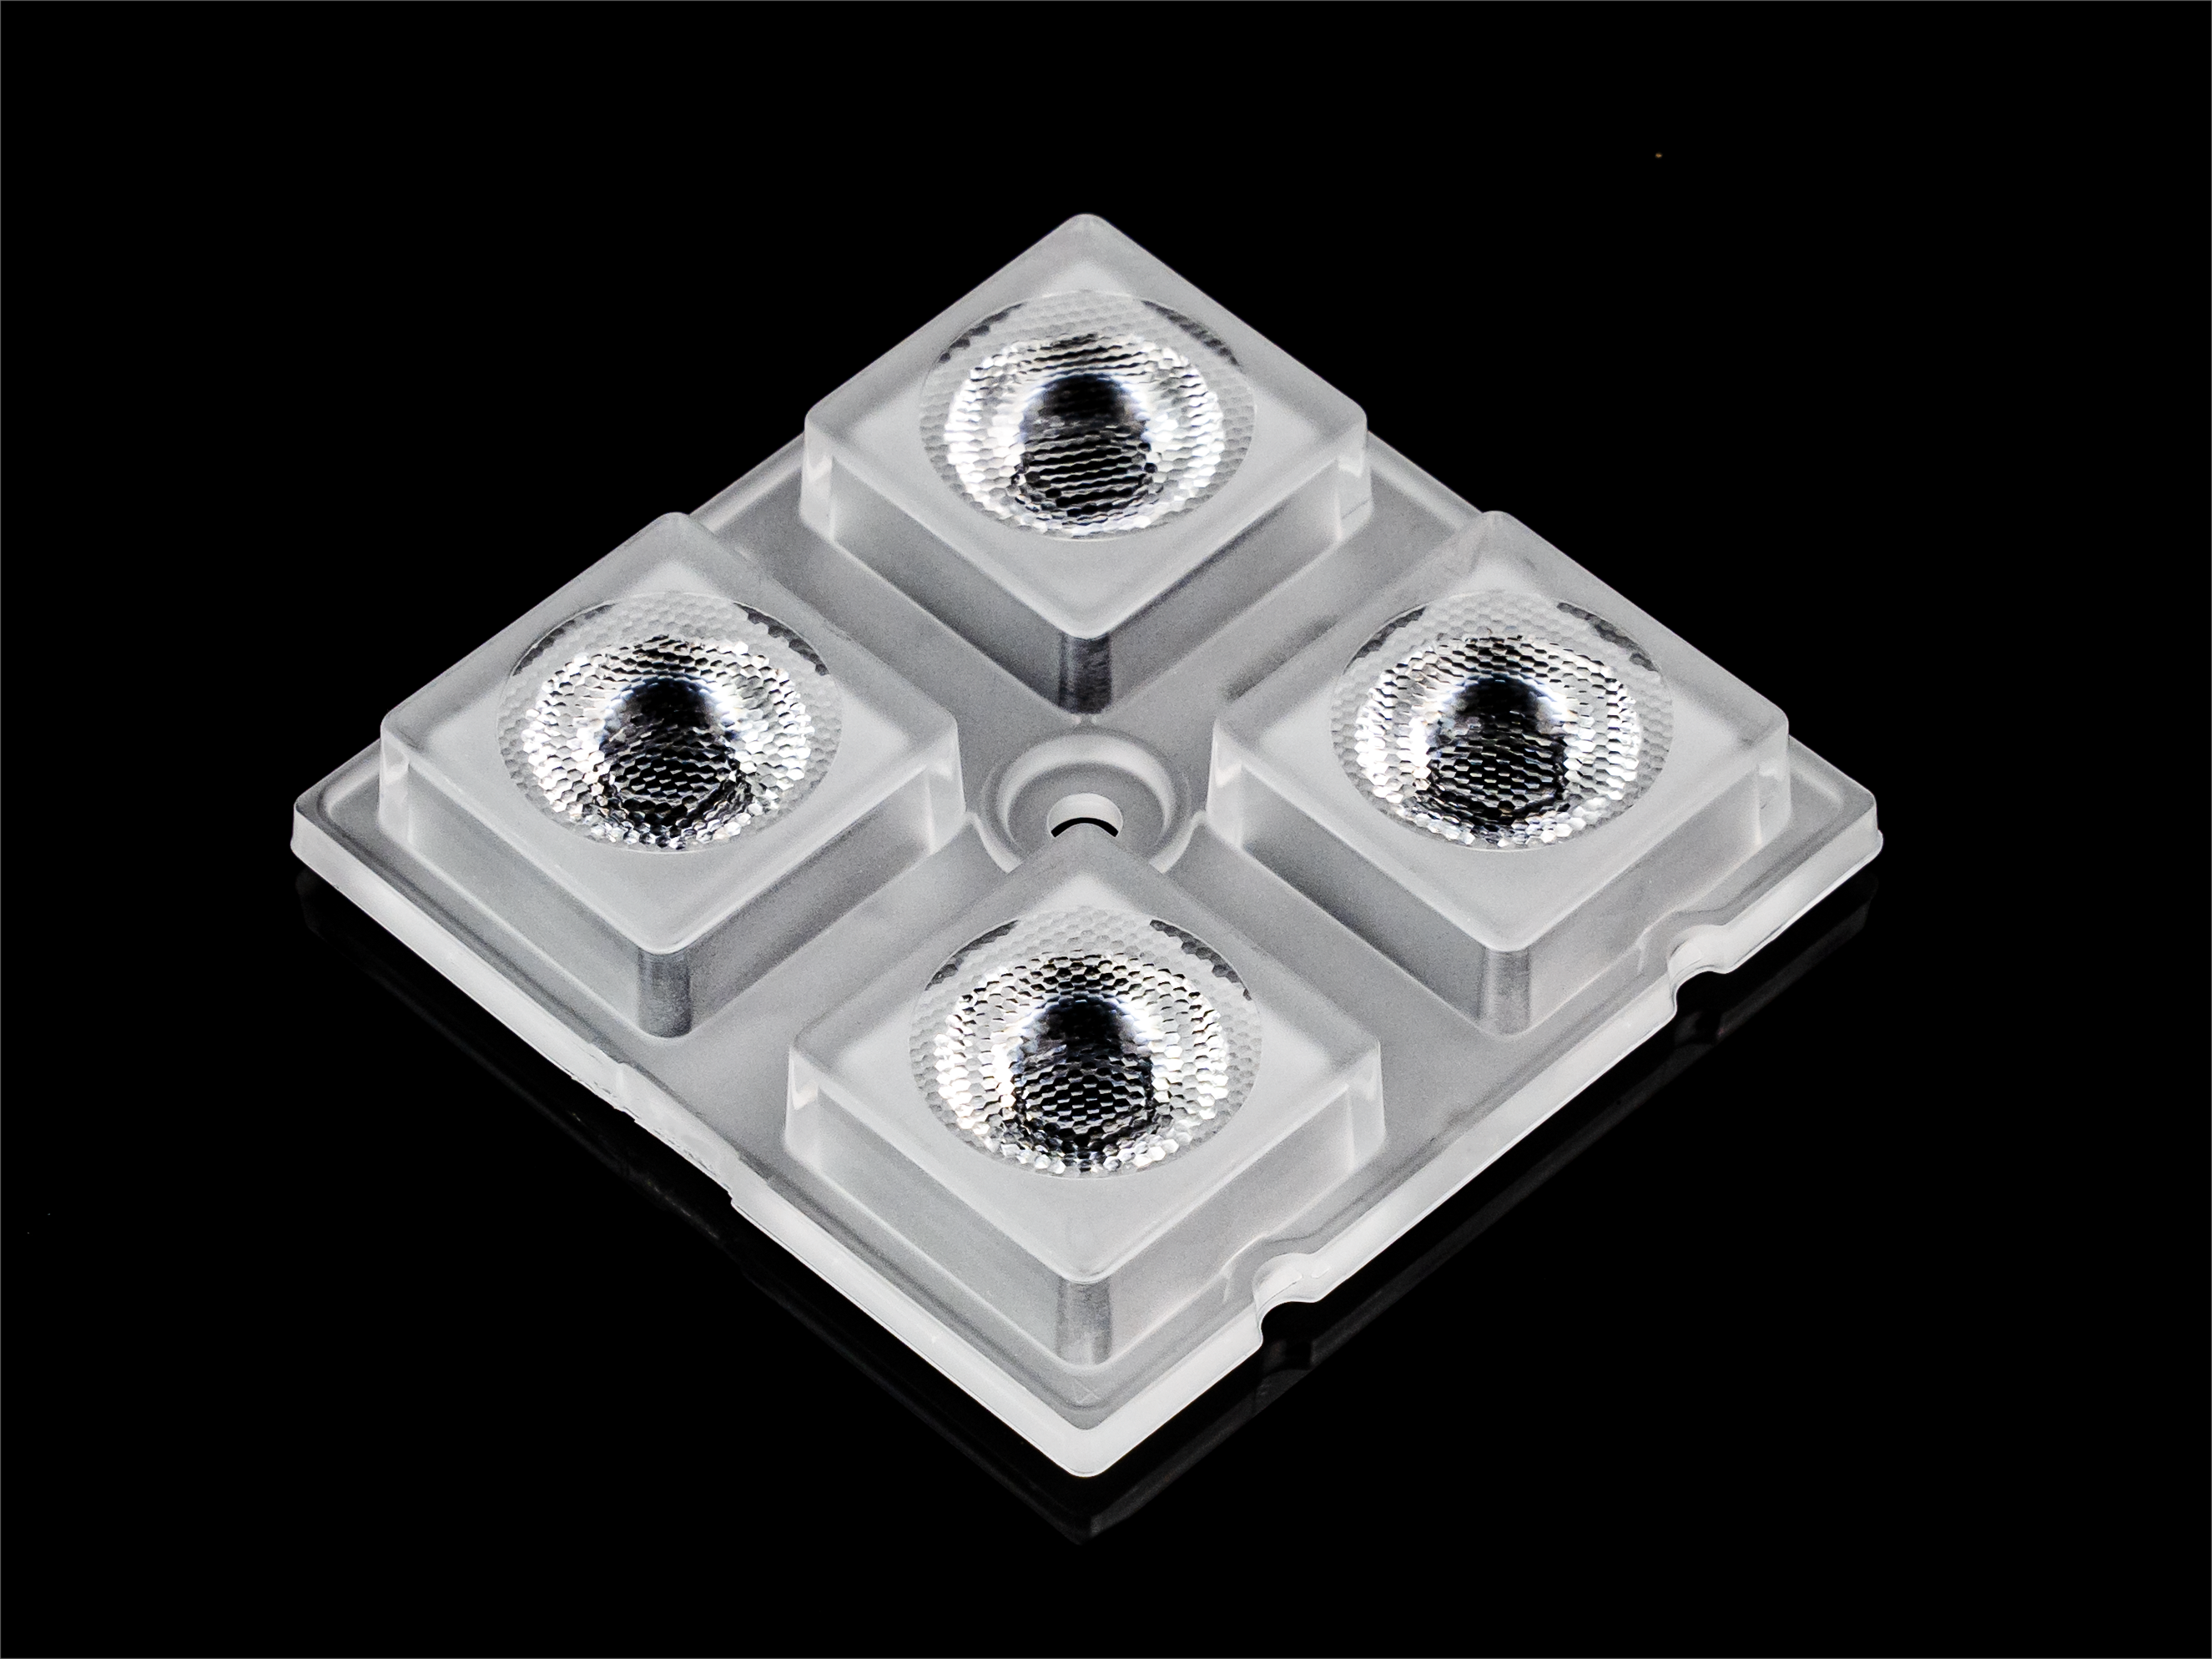 2x2 lens compatible with "3535" and "5050" LEDs 50° for High Bay lighting